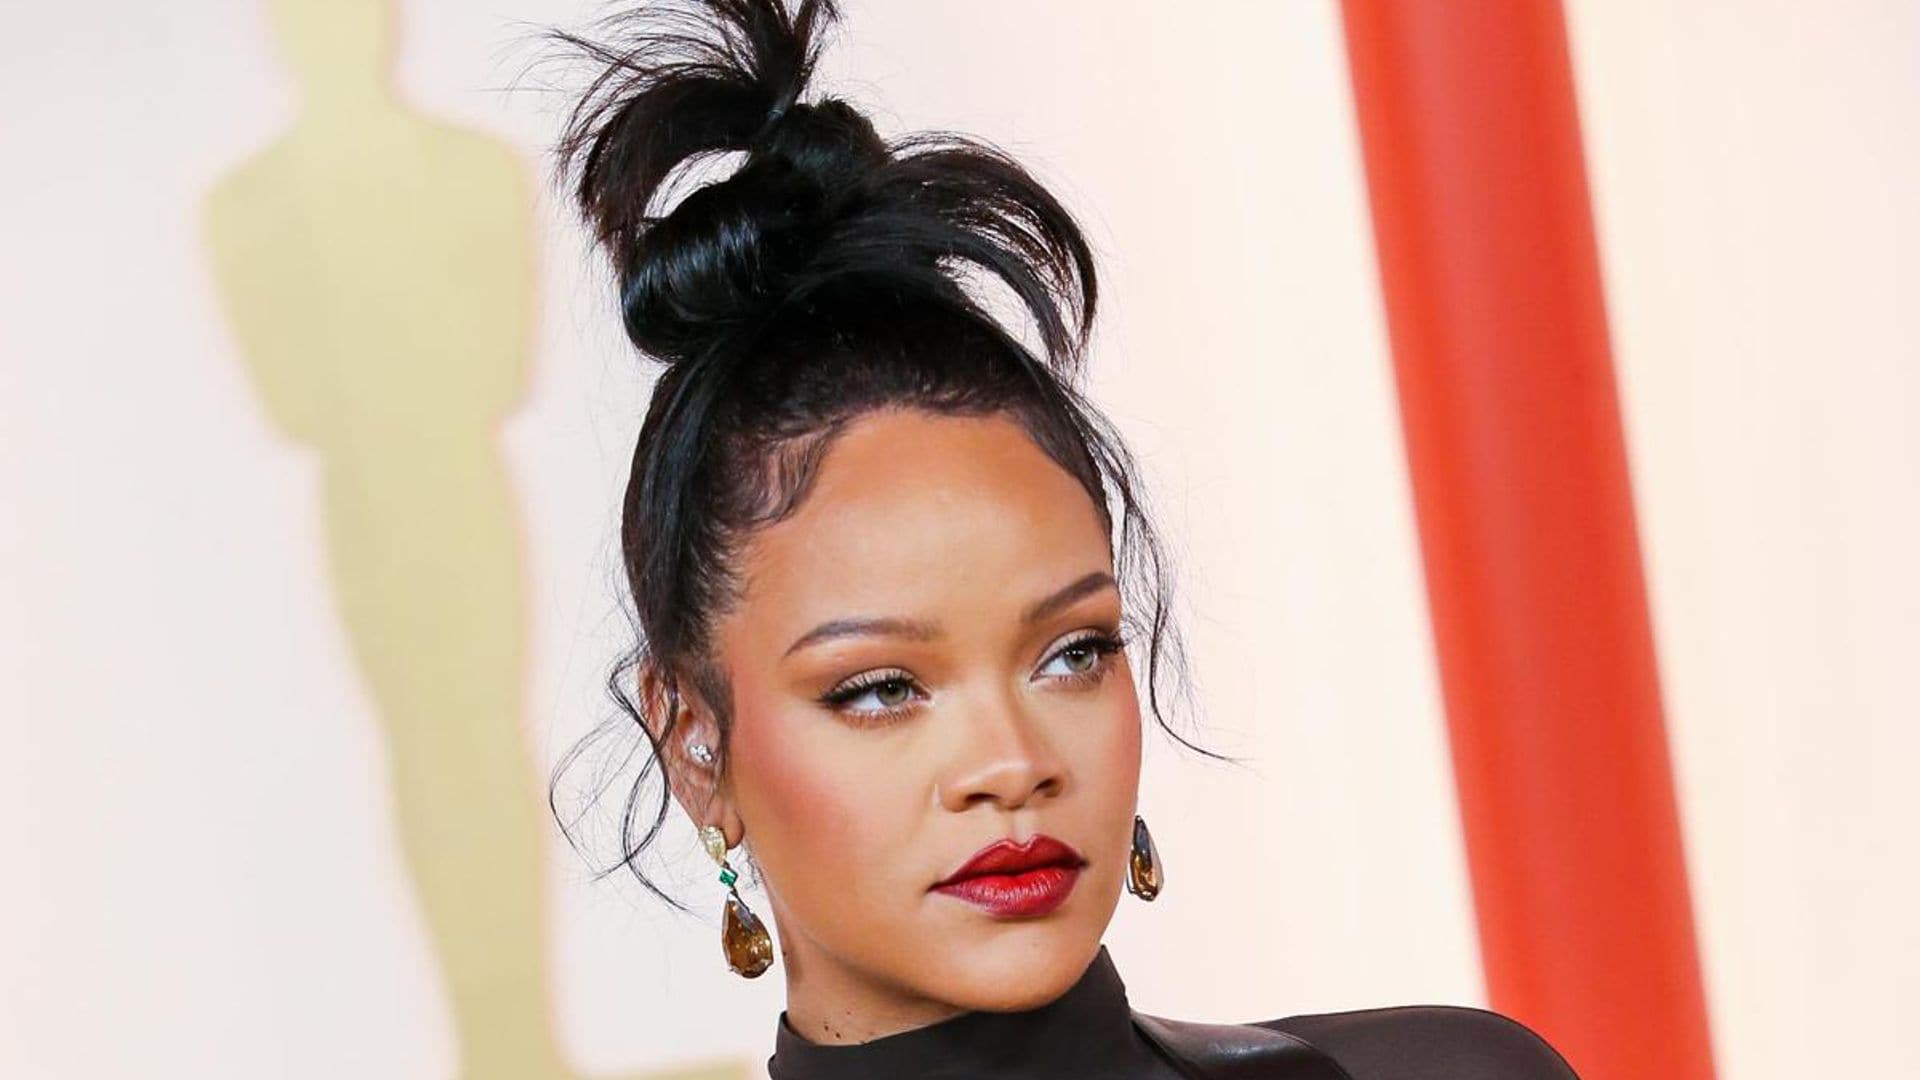 A random man shows up at Rihanna’s house to propose